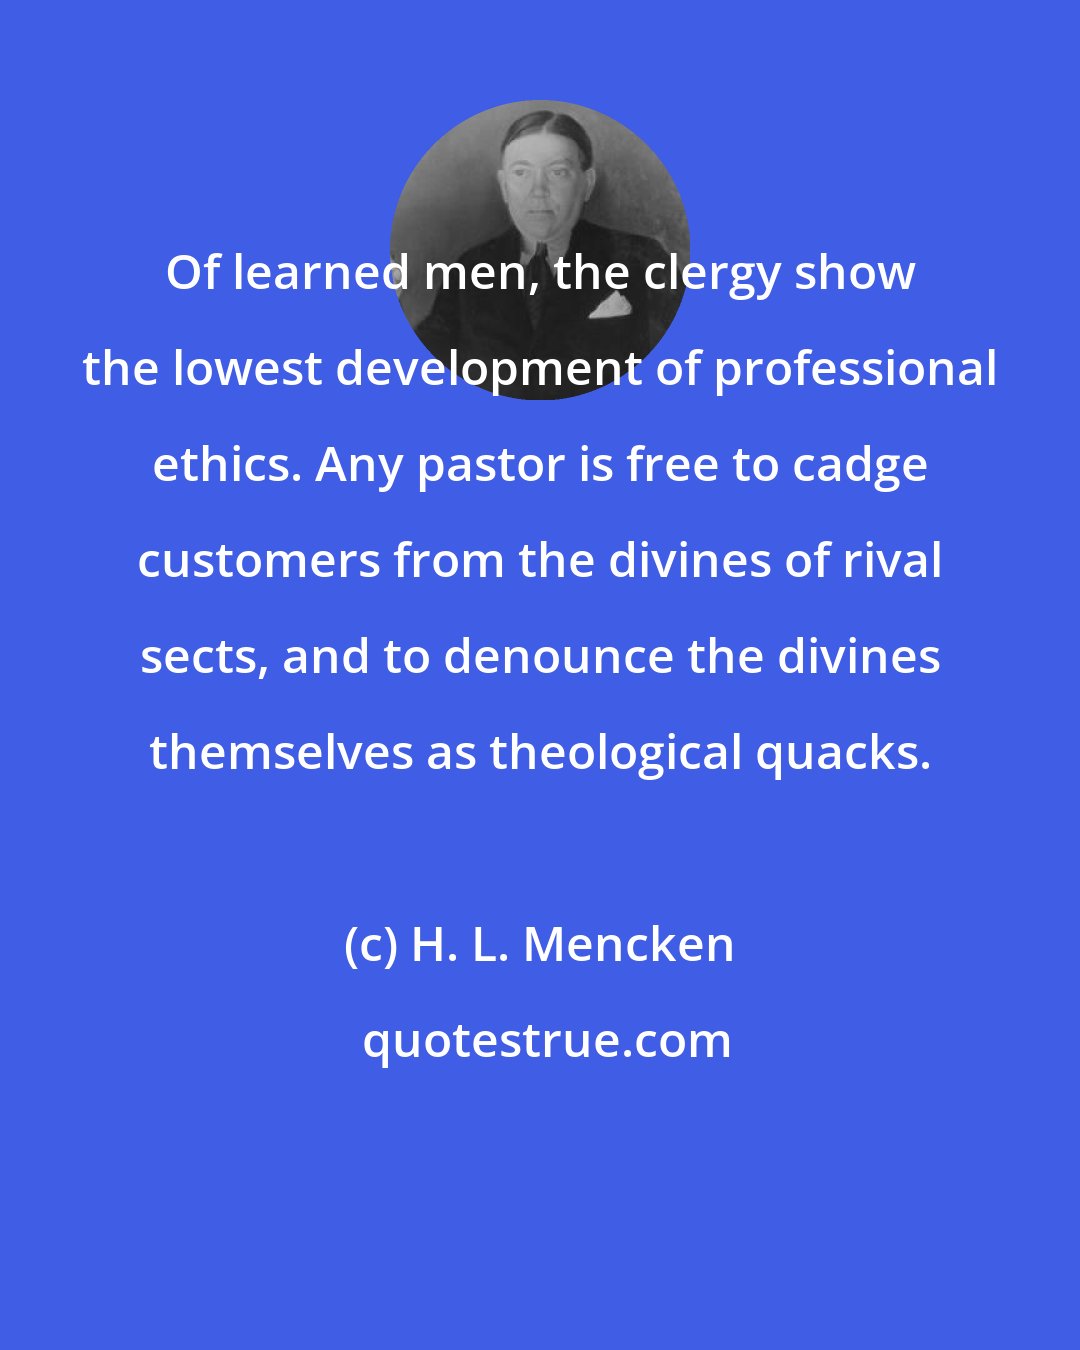 H. L. Mencken: Of learned men, the clergy show the lowest development of professional ethics. Any pastor is free to cadge customers from the divines of rival sects, and to denounce the divines themselves as theological quacks.